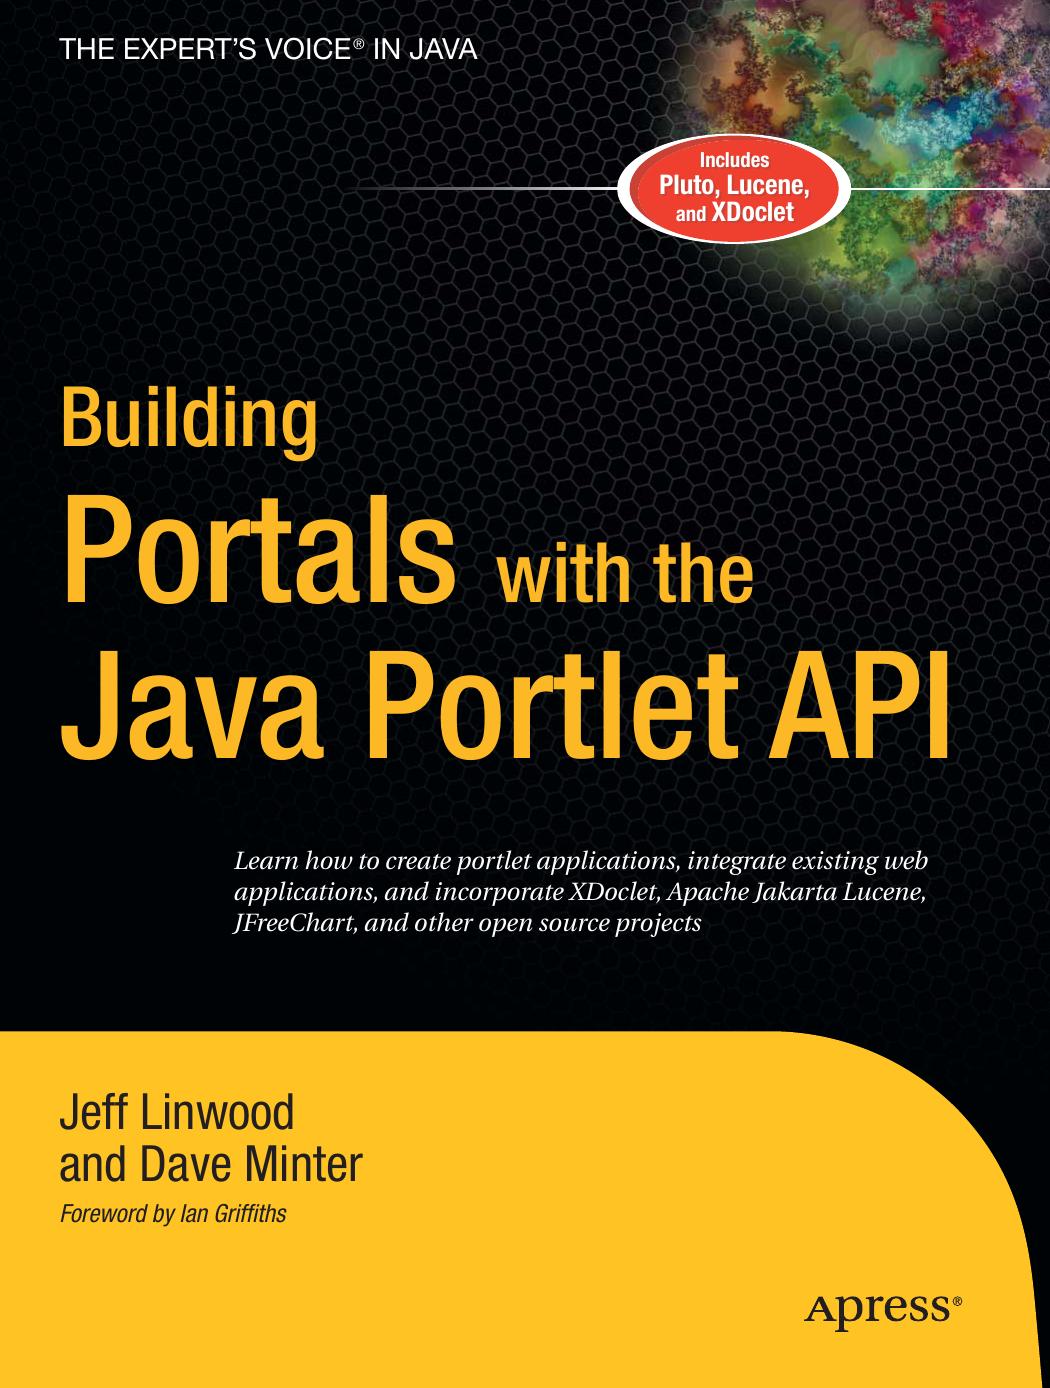 Building Portals With the Java Portlet API